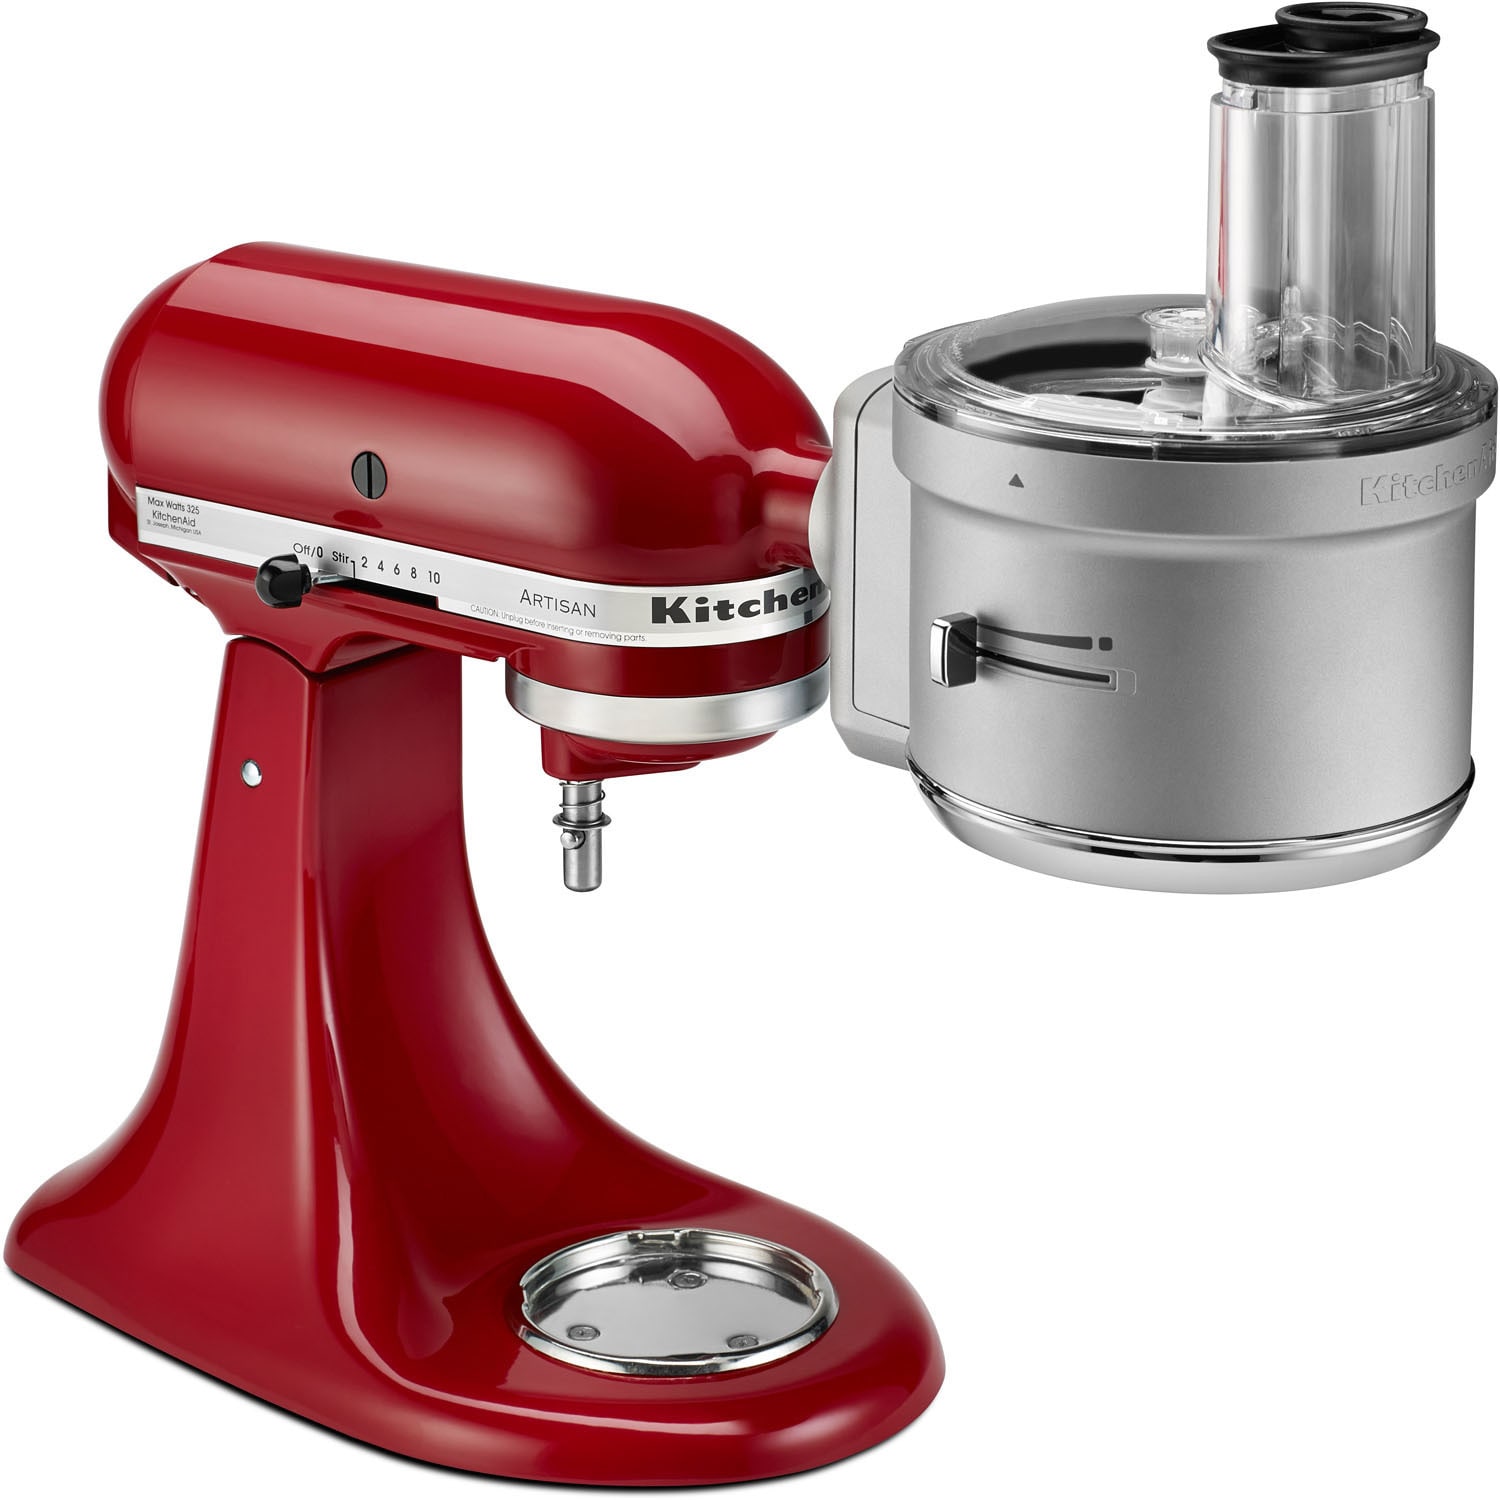 https://ak1.ostkcdn.com/images/products/9319117/KitchenAid-KSM2FPA-Food-Processor-Attachment-with-Commercial-Style-Dicing-Kit-c2e1dc59-b25d-4d00-abe3-7b4cb75b48fa.jpg